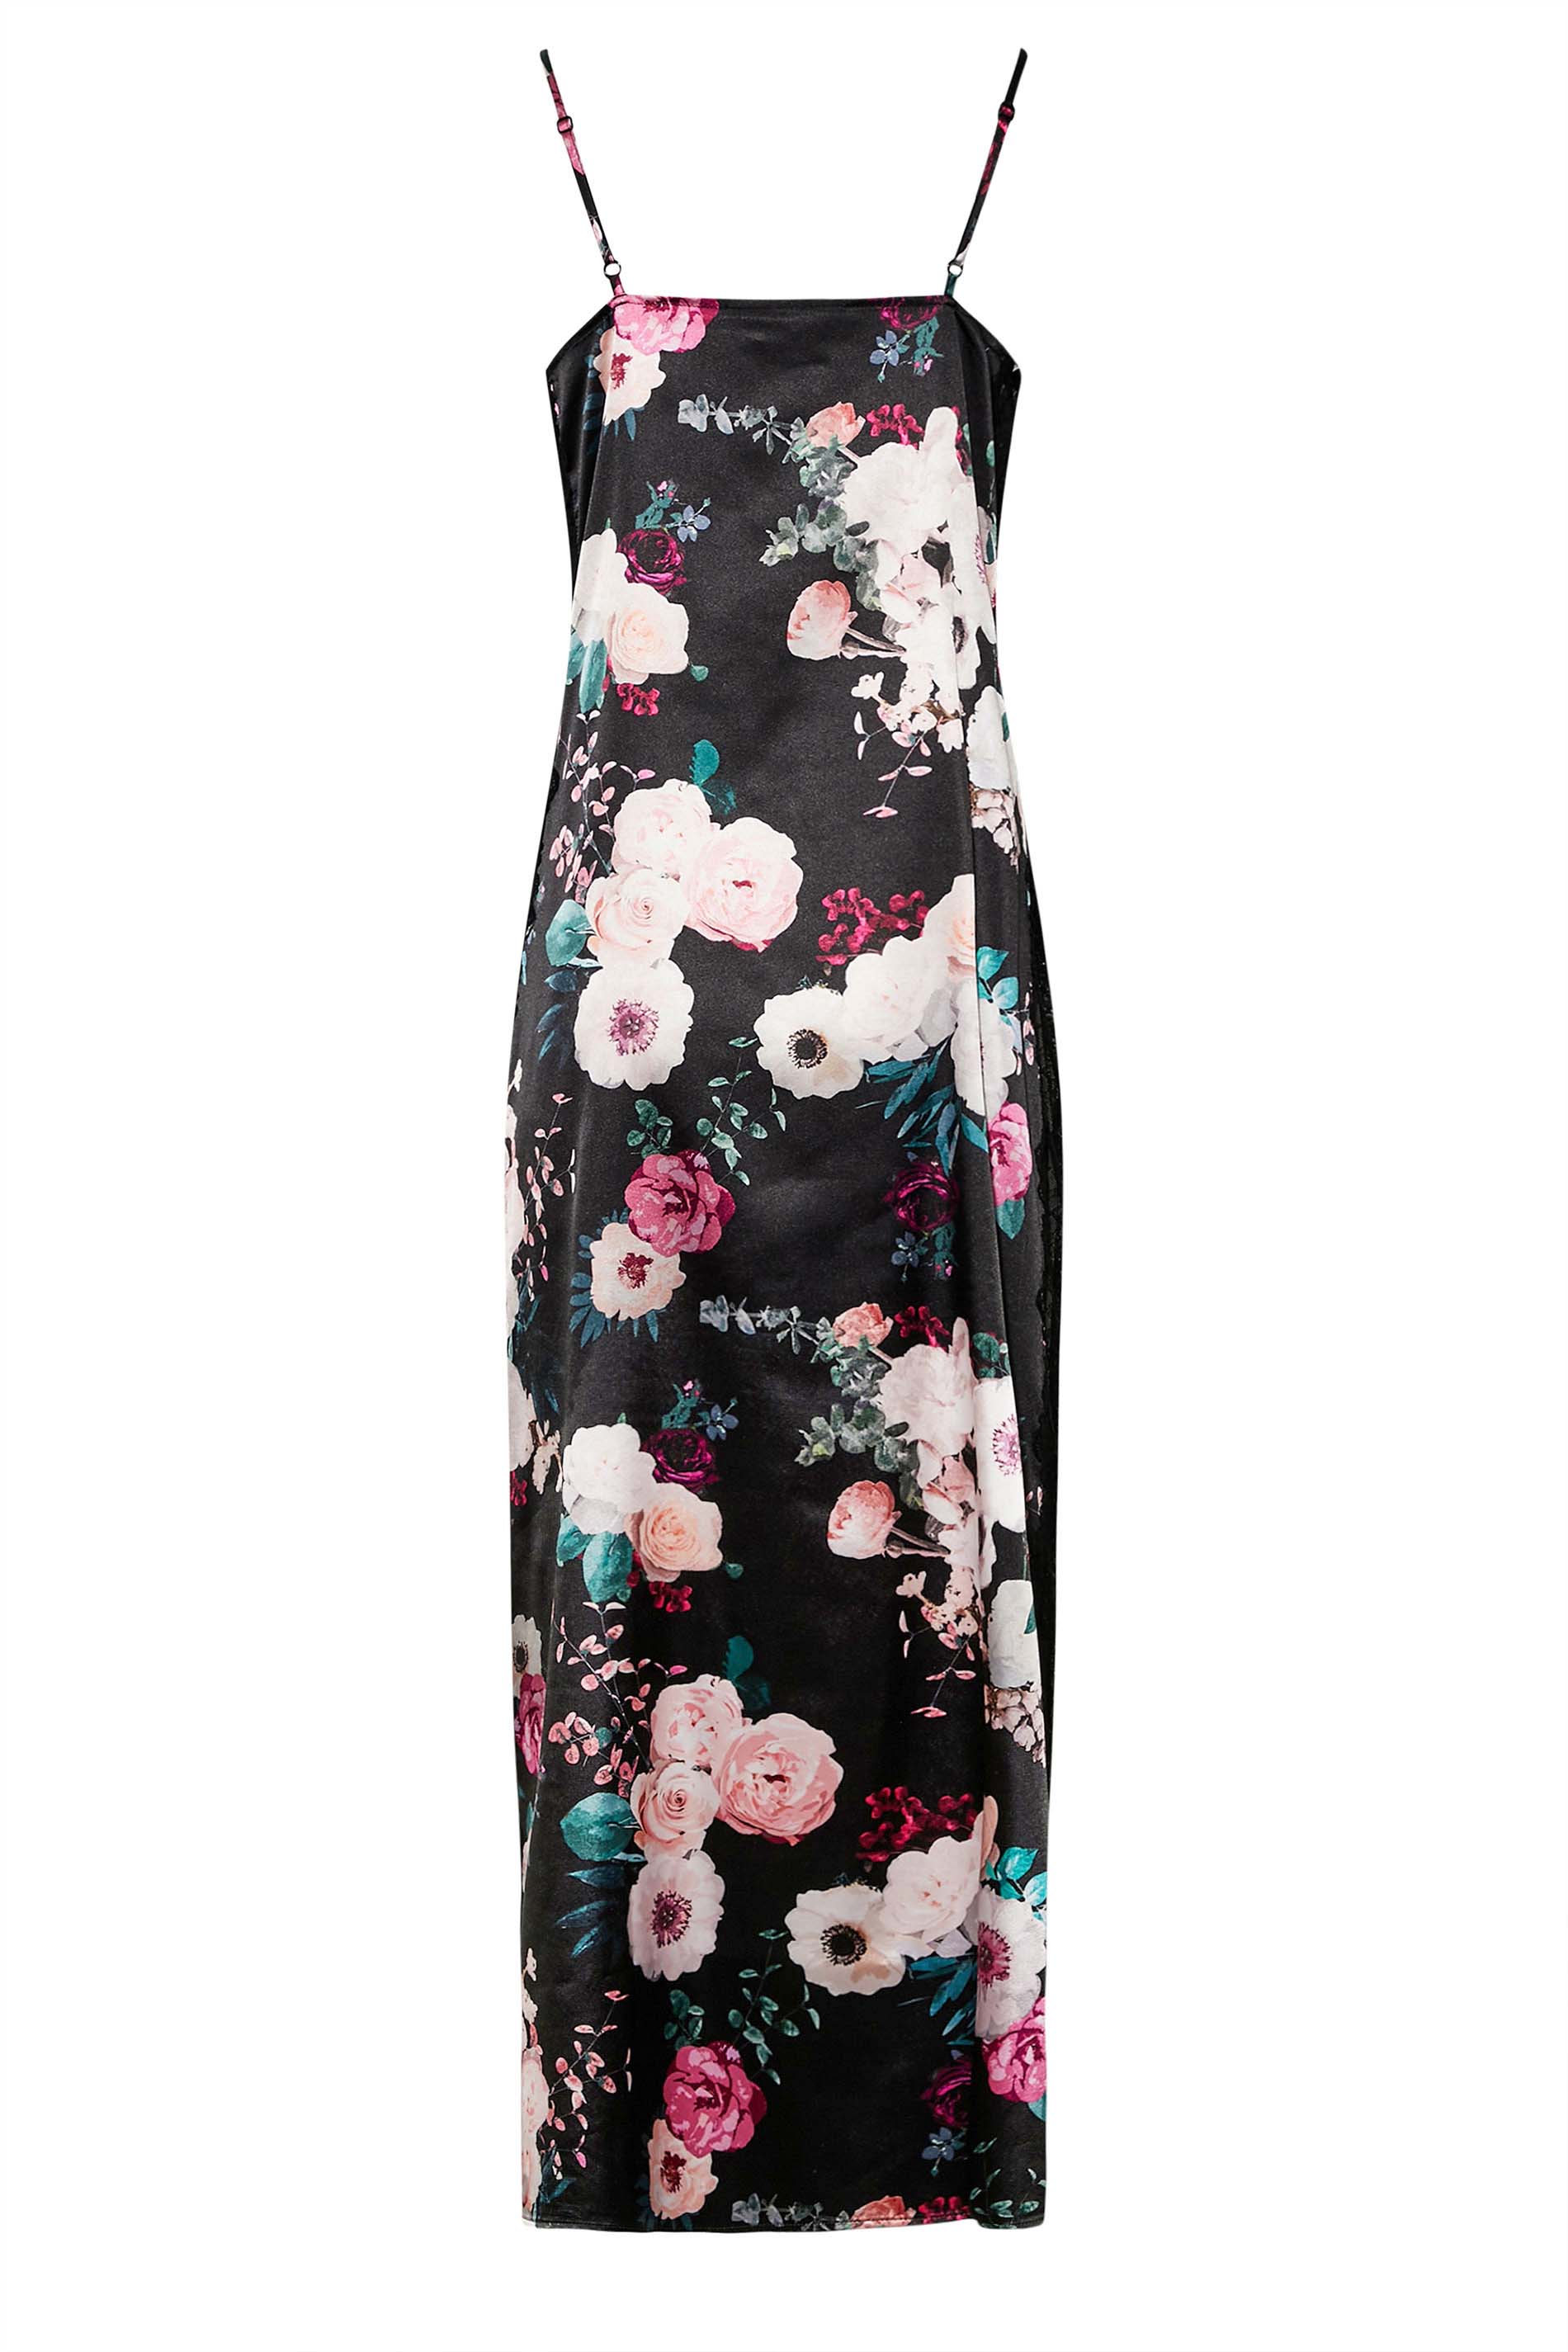 LTS Tall Women's Black Floral Satin Chemise | Long Tall Sally